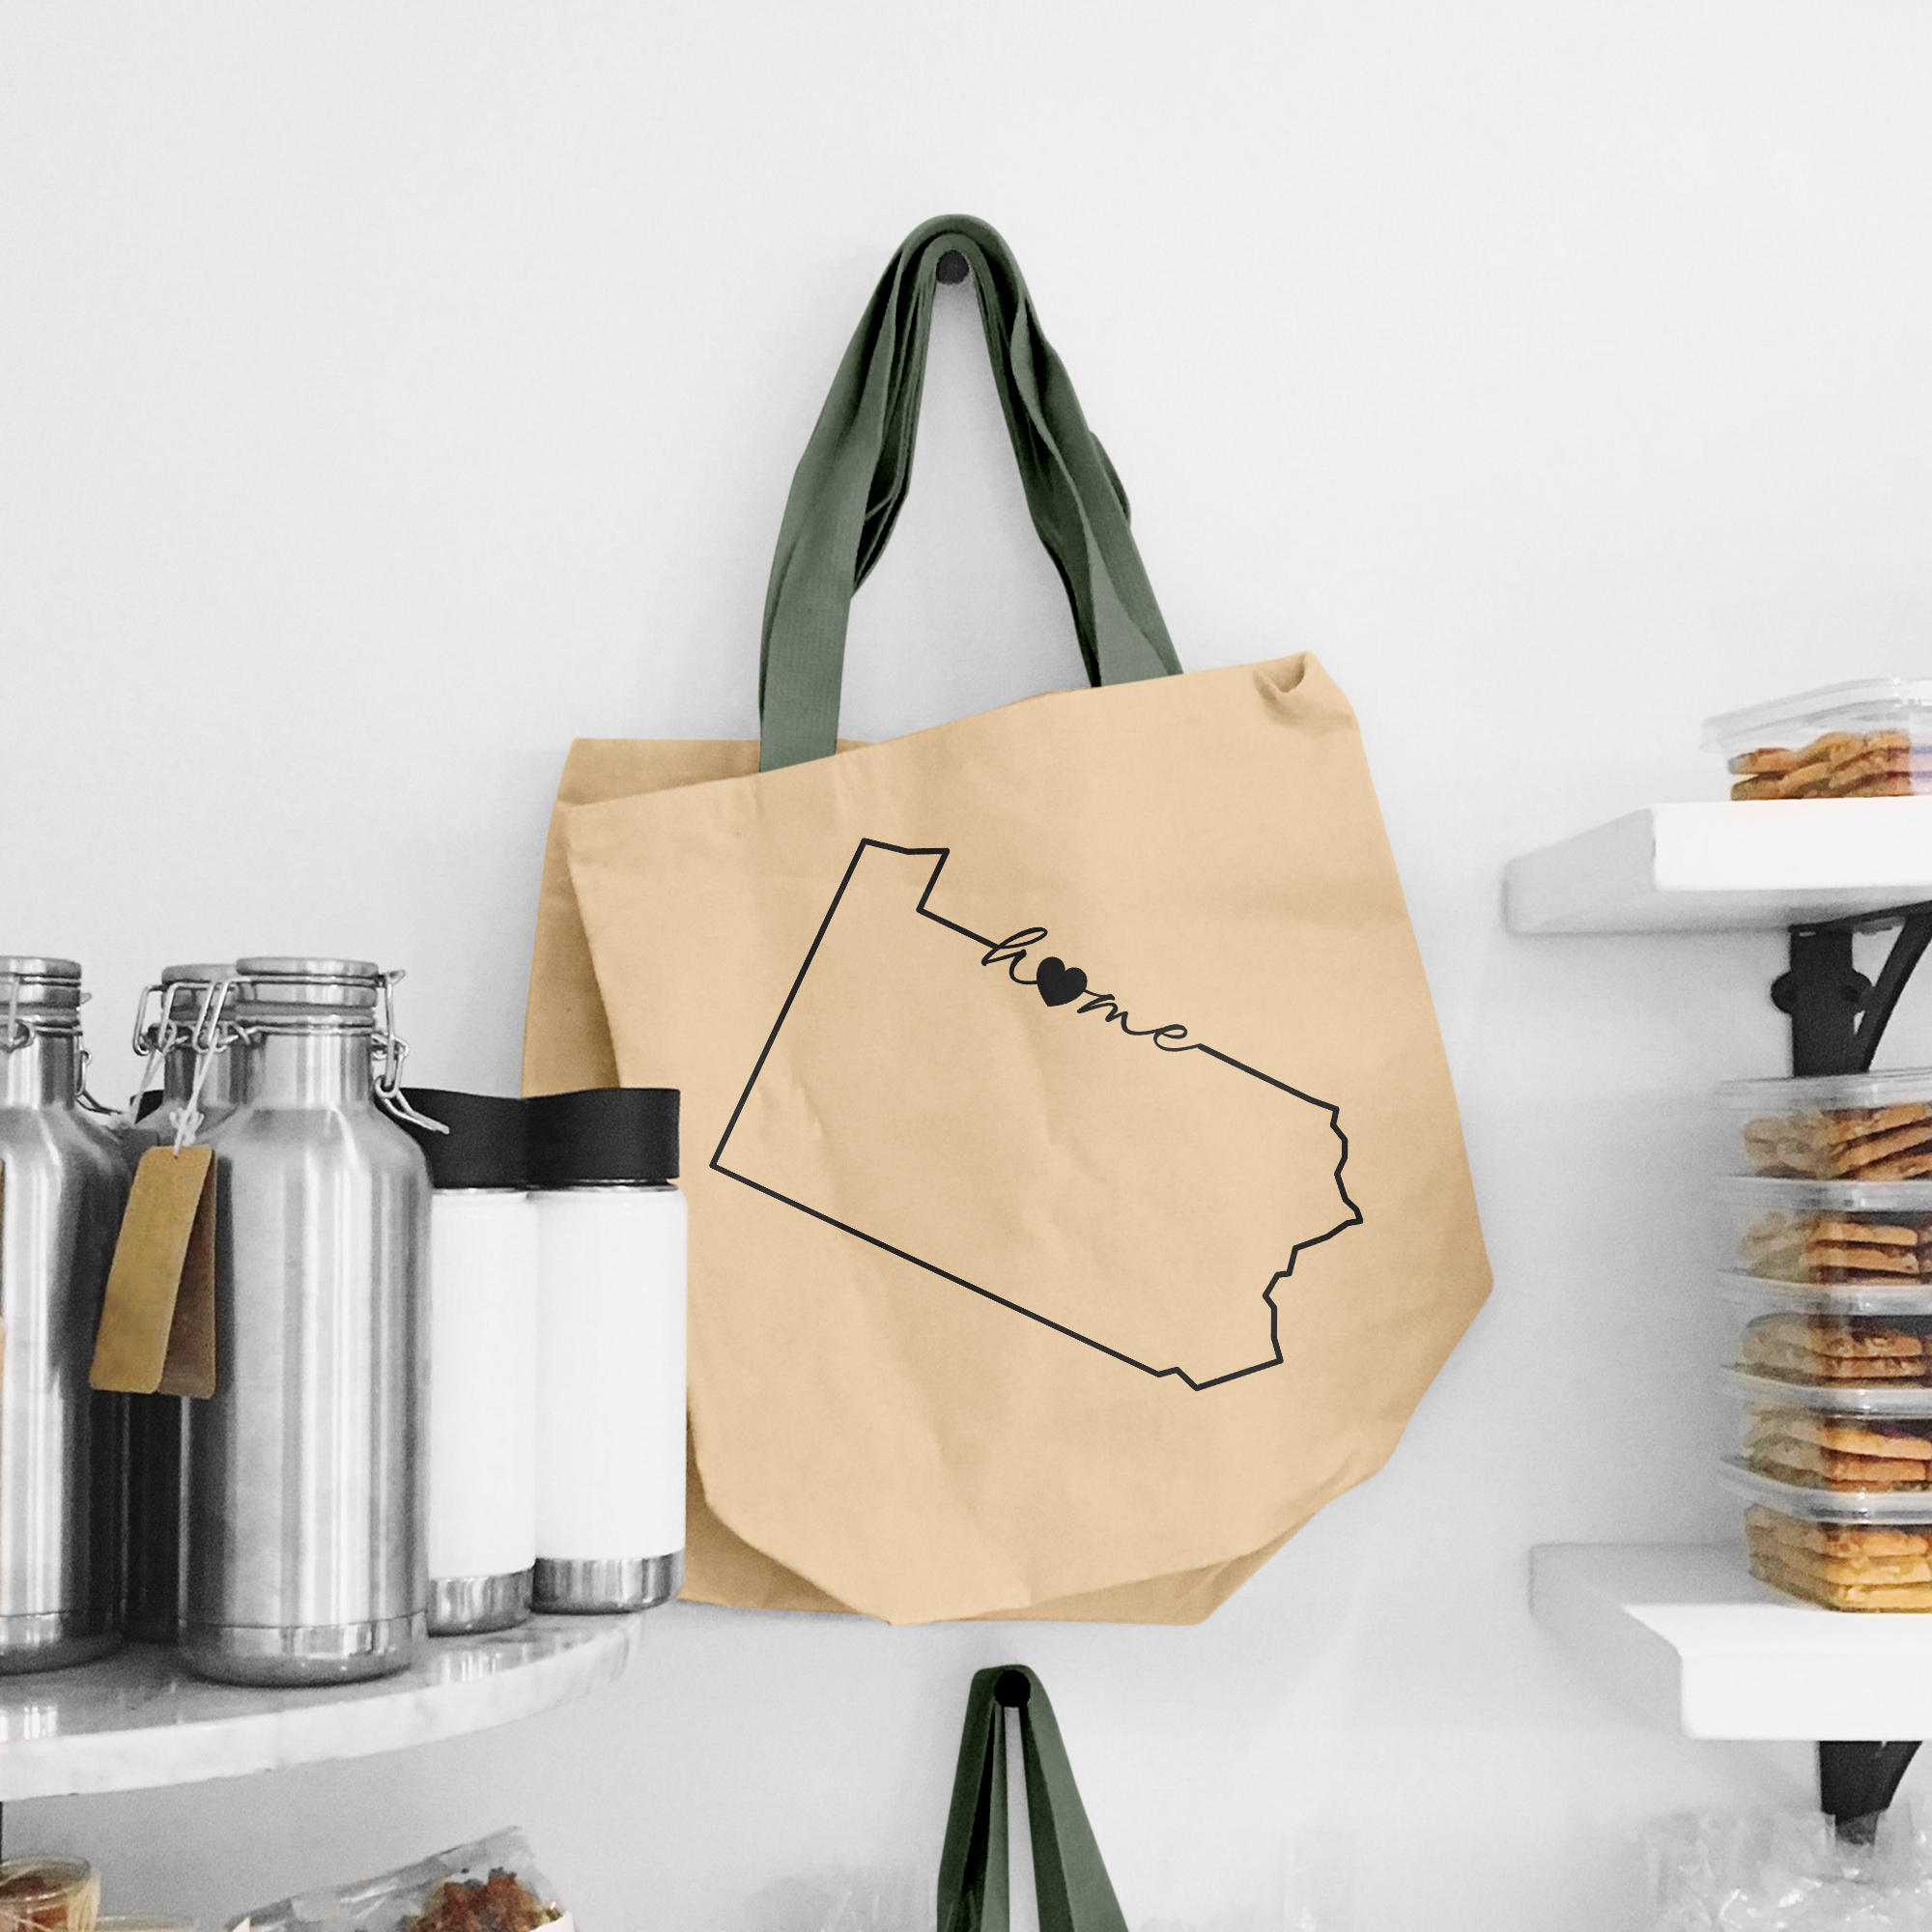 Black illustration of map of Pennsylvania on the beige shopping bag with dirty green handle.